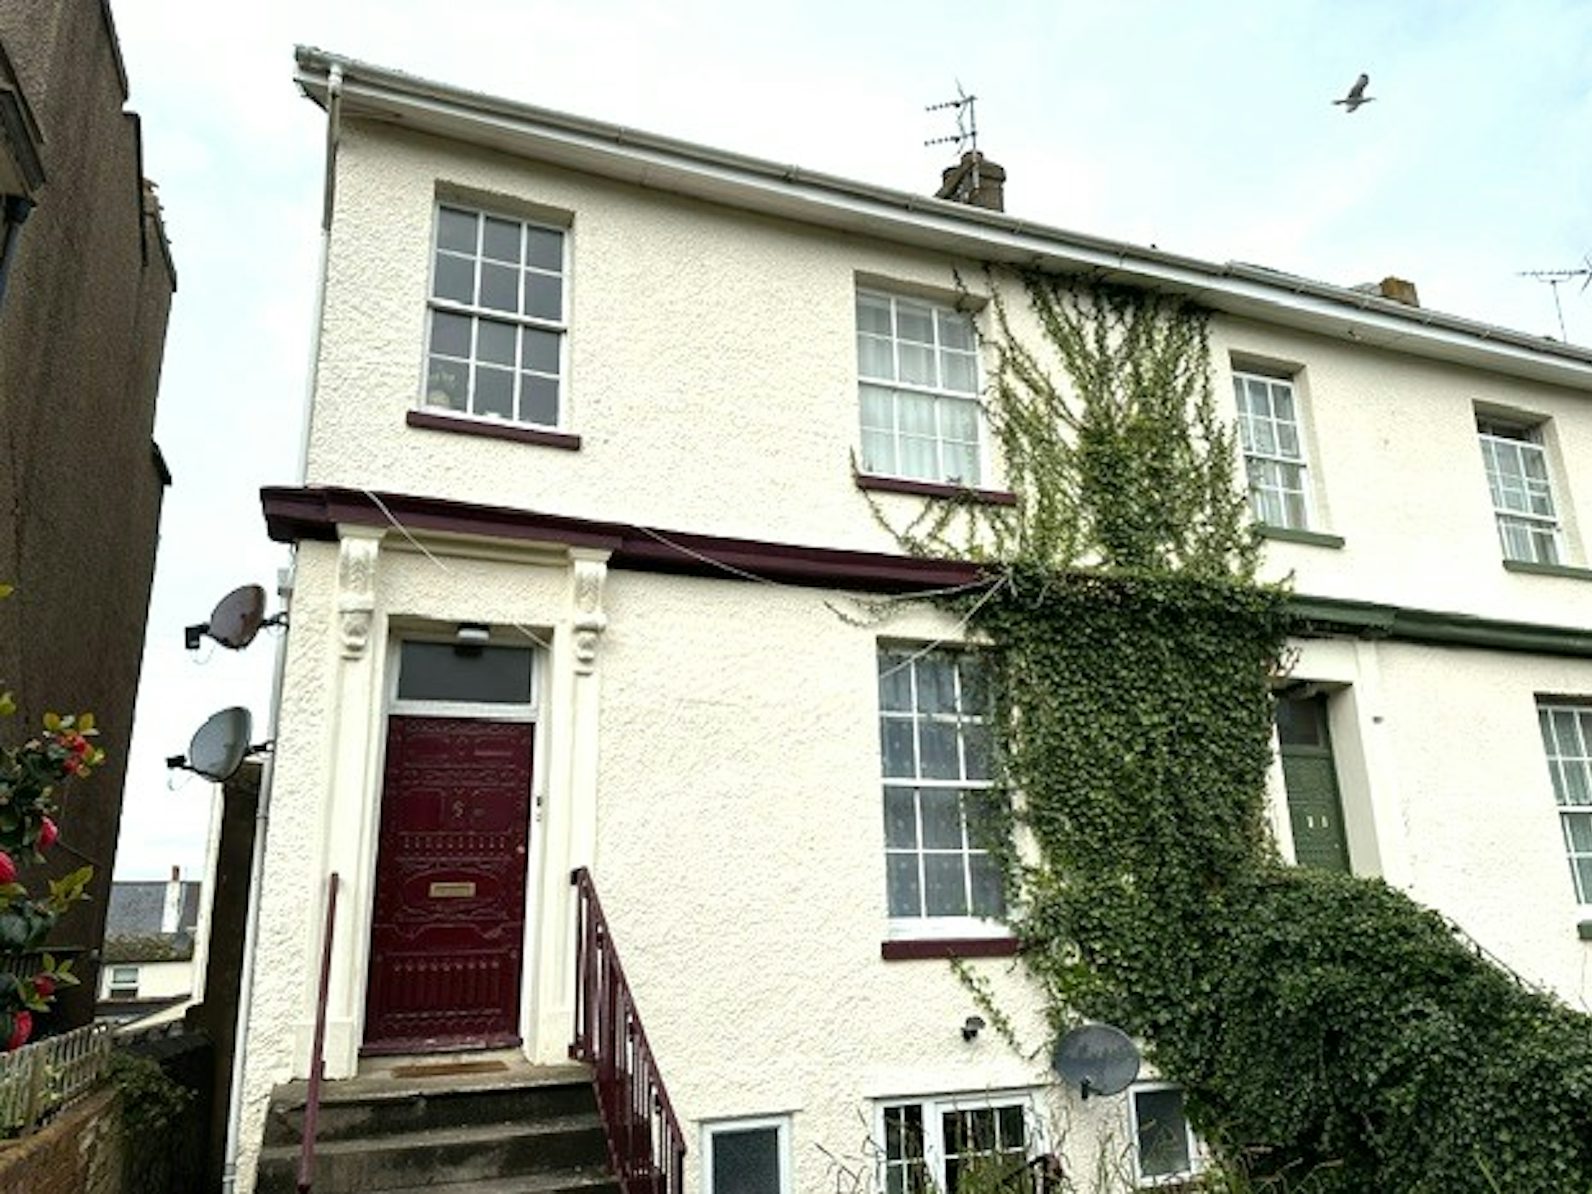 Flat to rent on Albion Terrace Exmouth, EX8